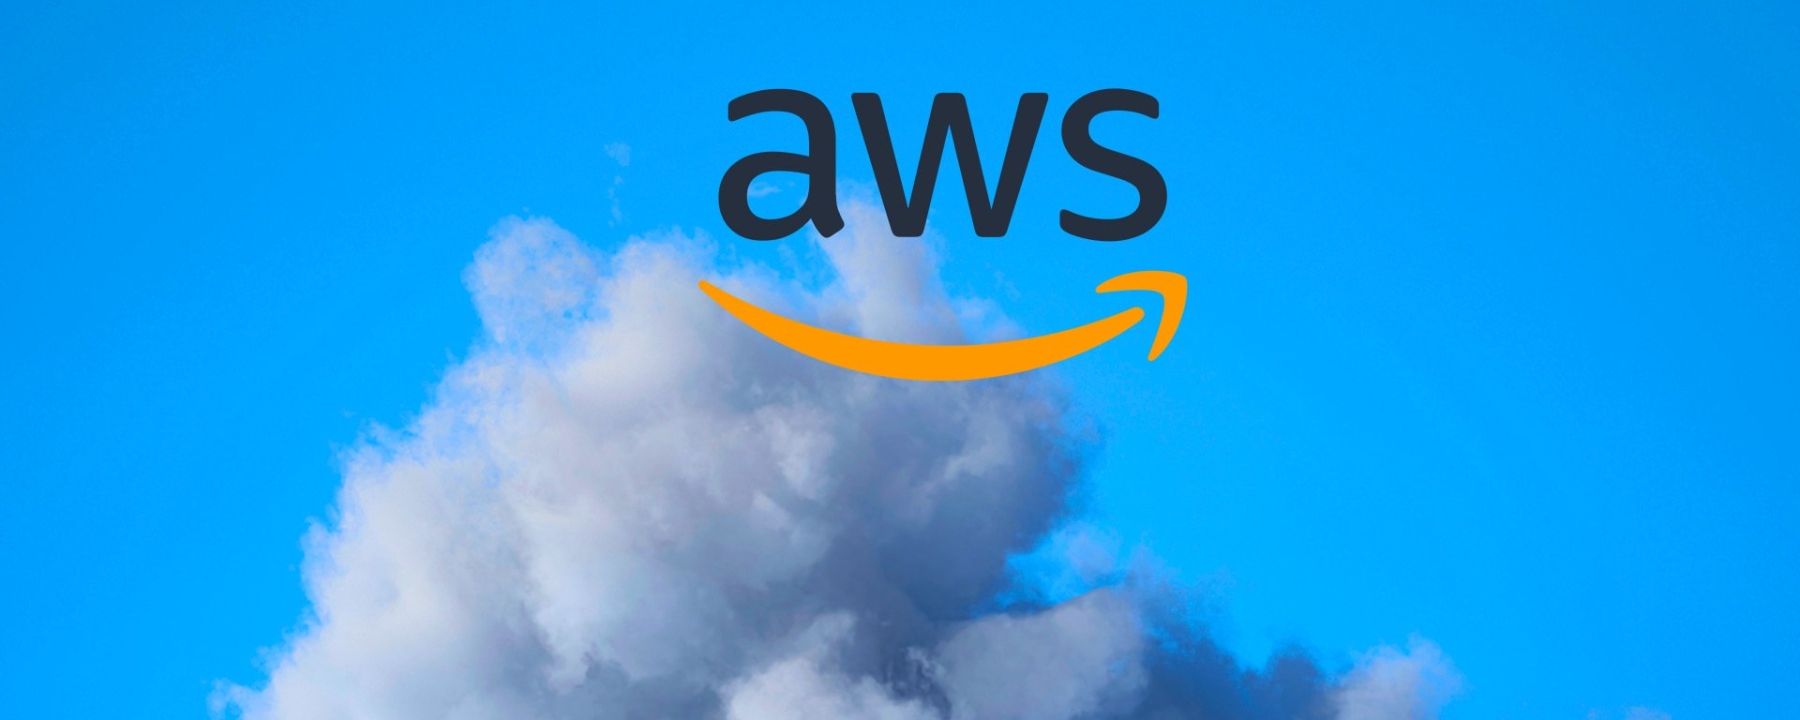 Walking on clouds with AWS